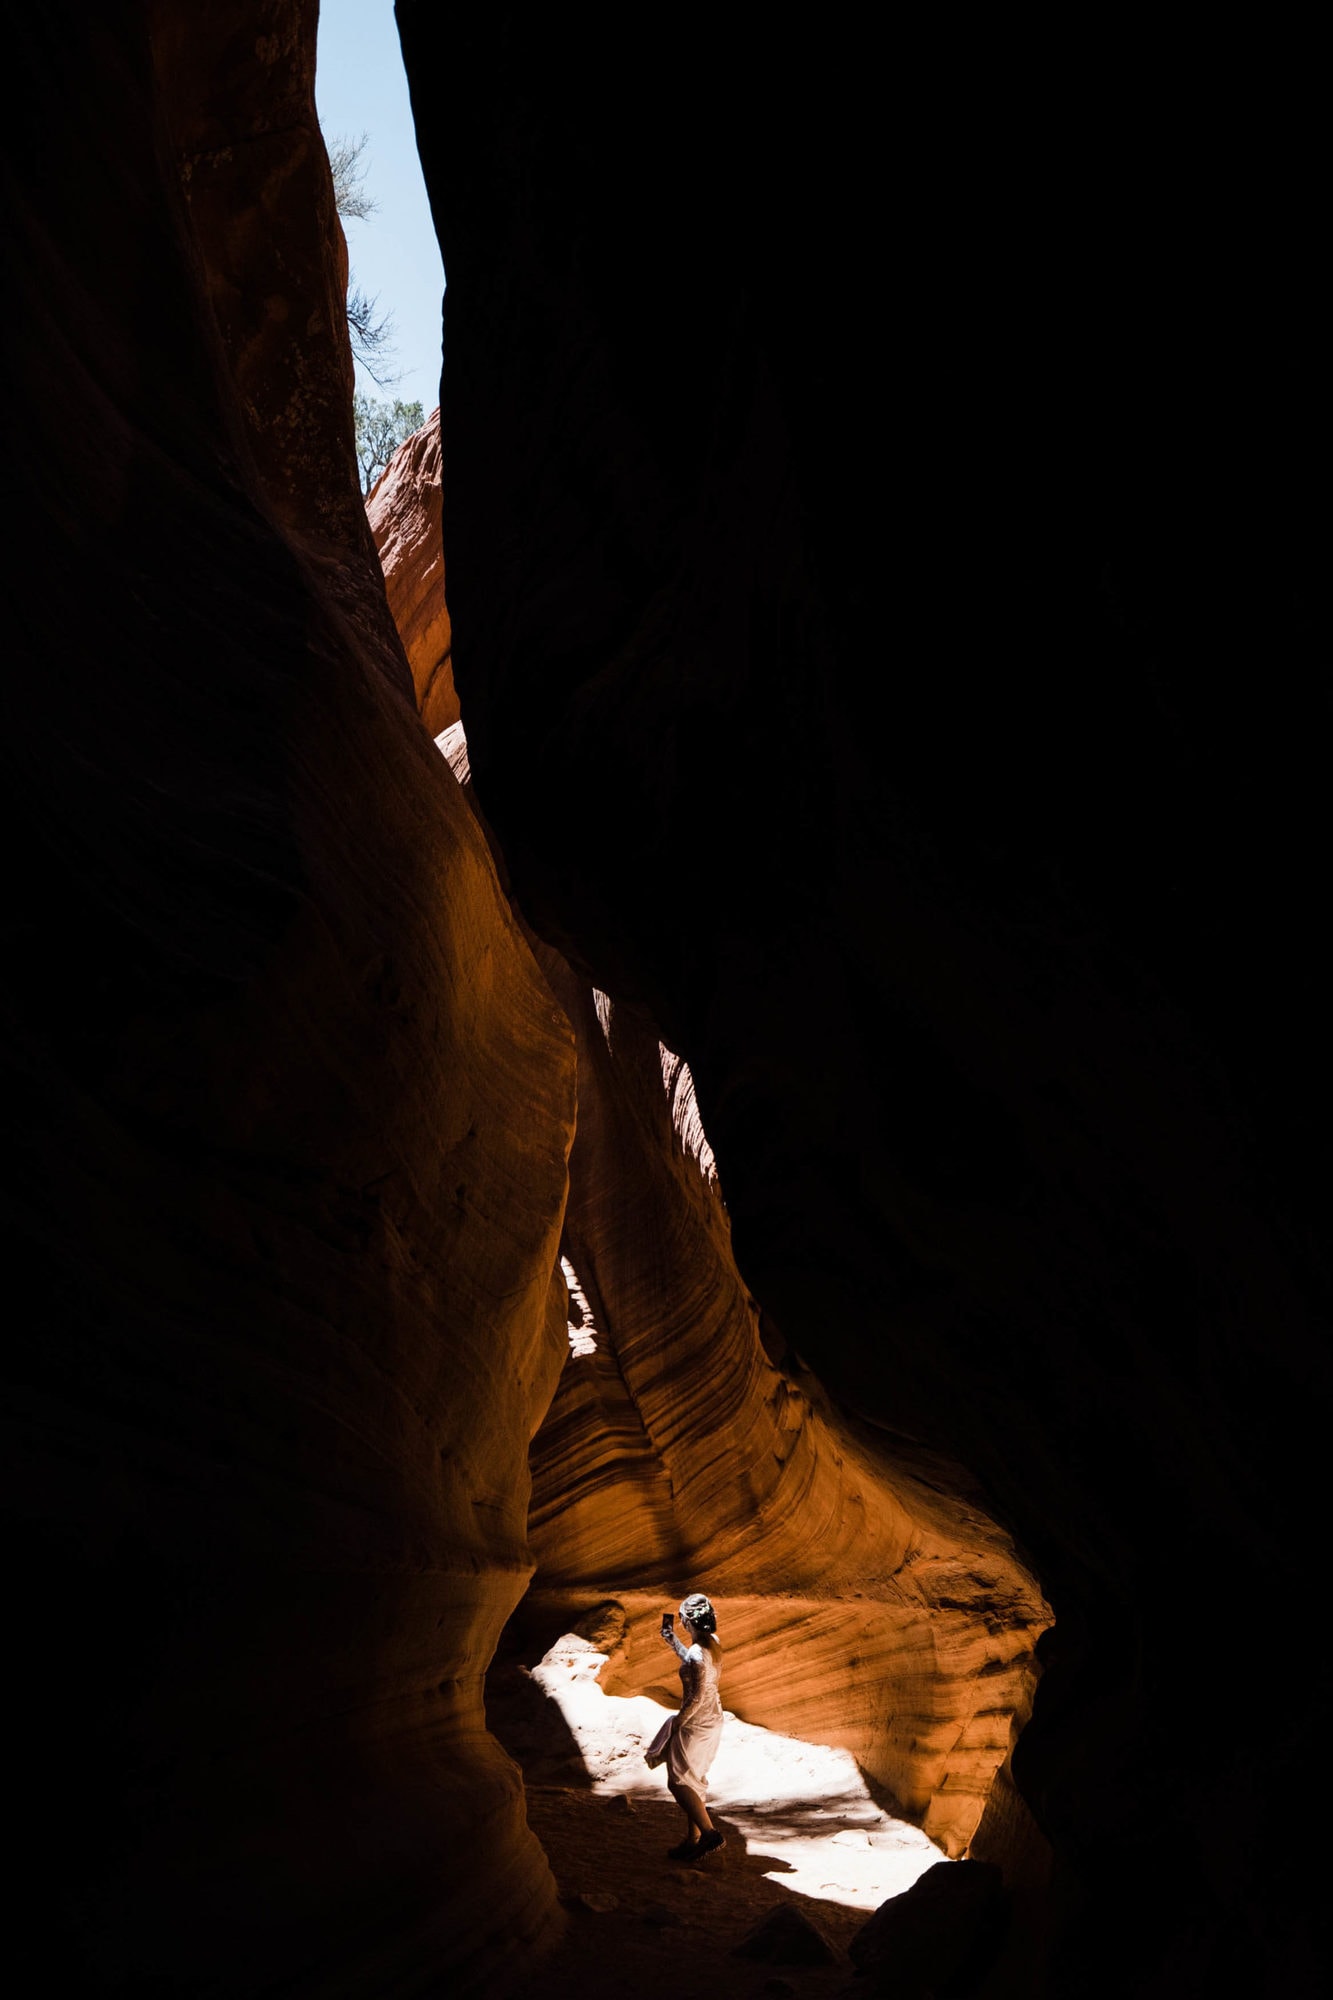 This Zion National Park elopement has it all; plot twists, off-roading, slot canyons, and an absolutely killer view. You don't want to miss it!